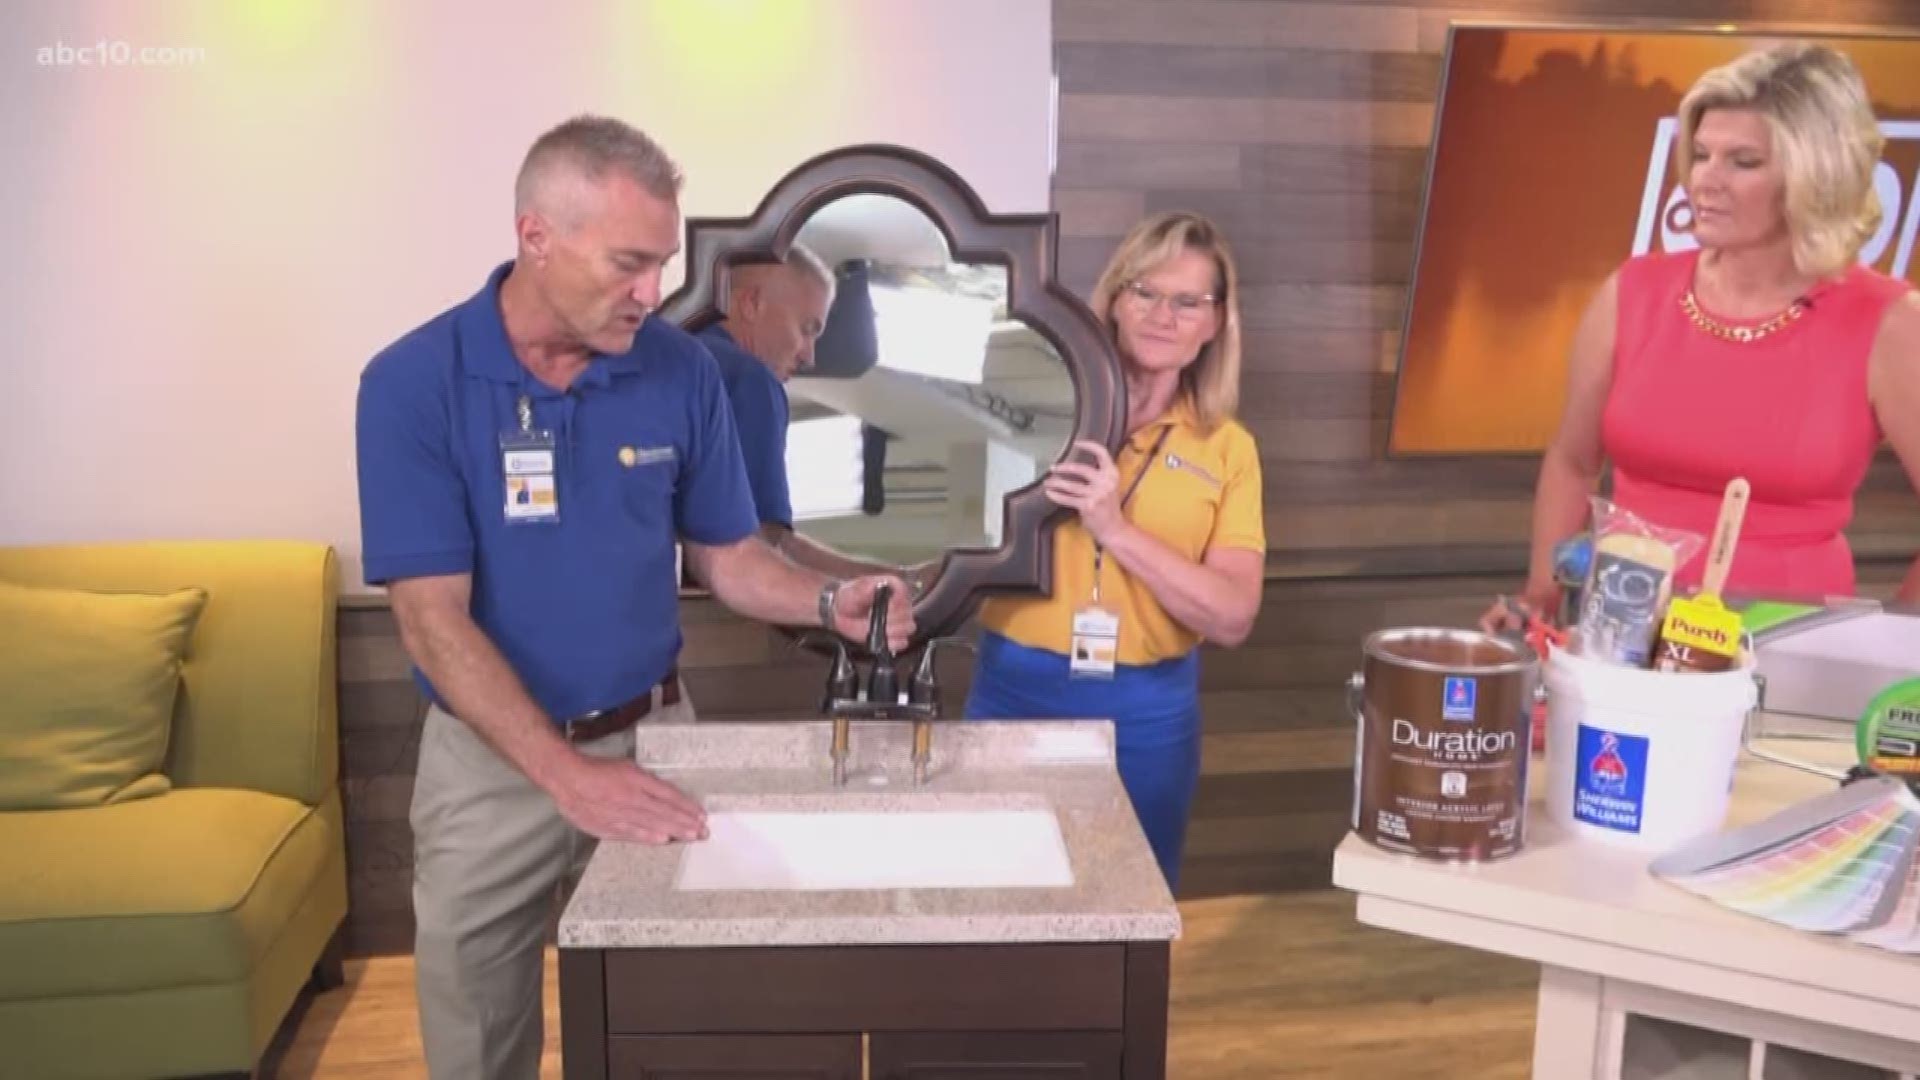 There are many ways to improve the value on your home , according to the owner of Handyman Connection in Folsom. One way is to Install a new granite bathroom vanity top, which can be purchased for under $400 at any home improvement store.